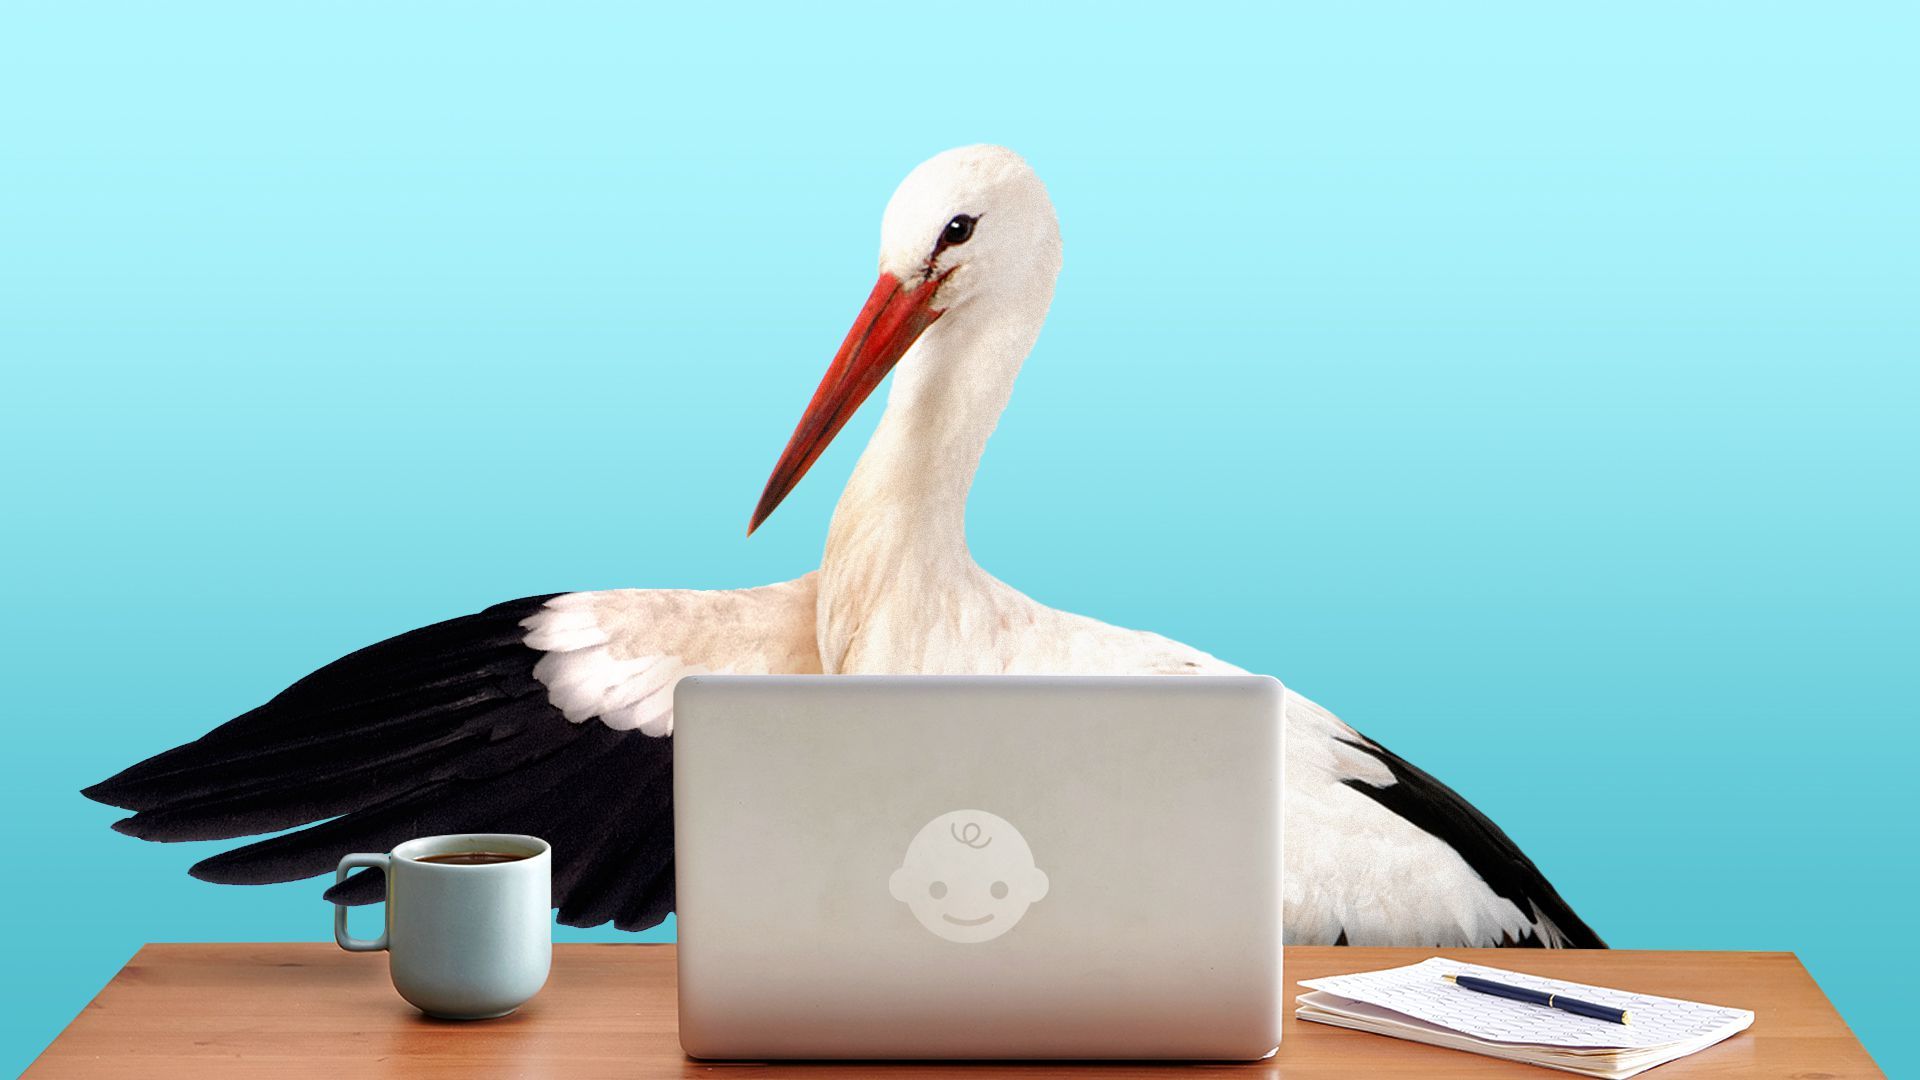 Illustration of a stork sitting at a desk with a laptop and cup of coffee